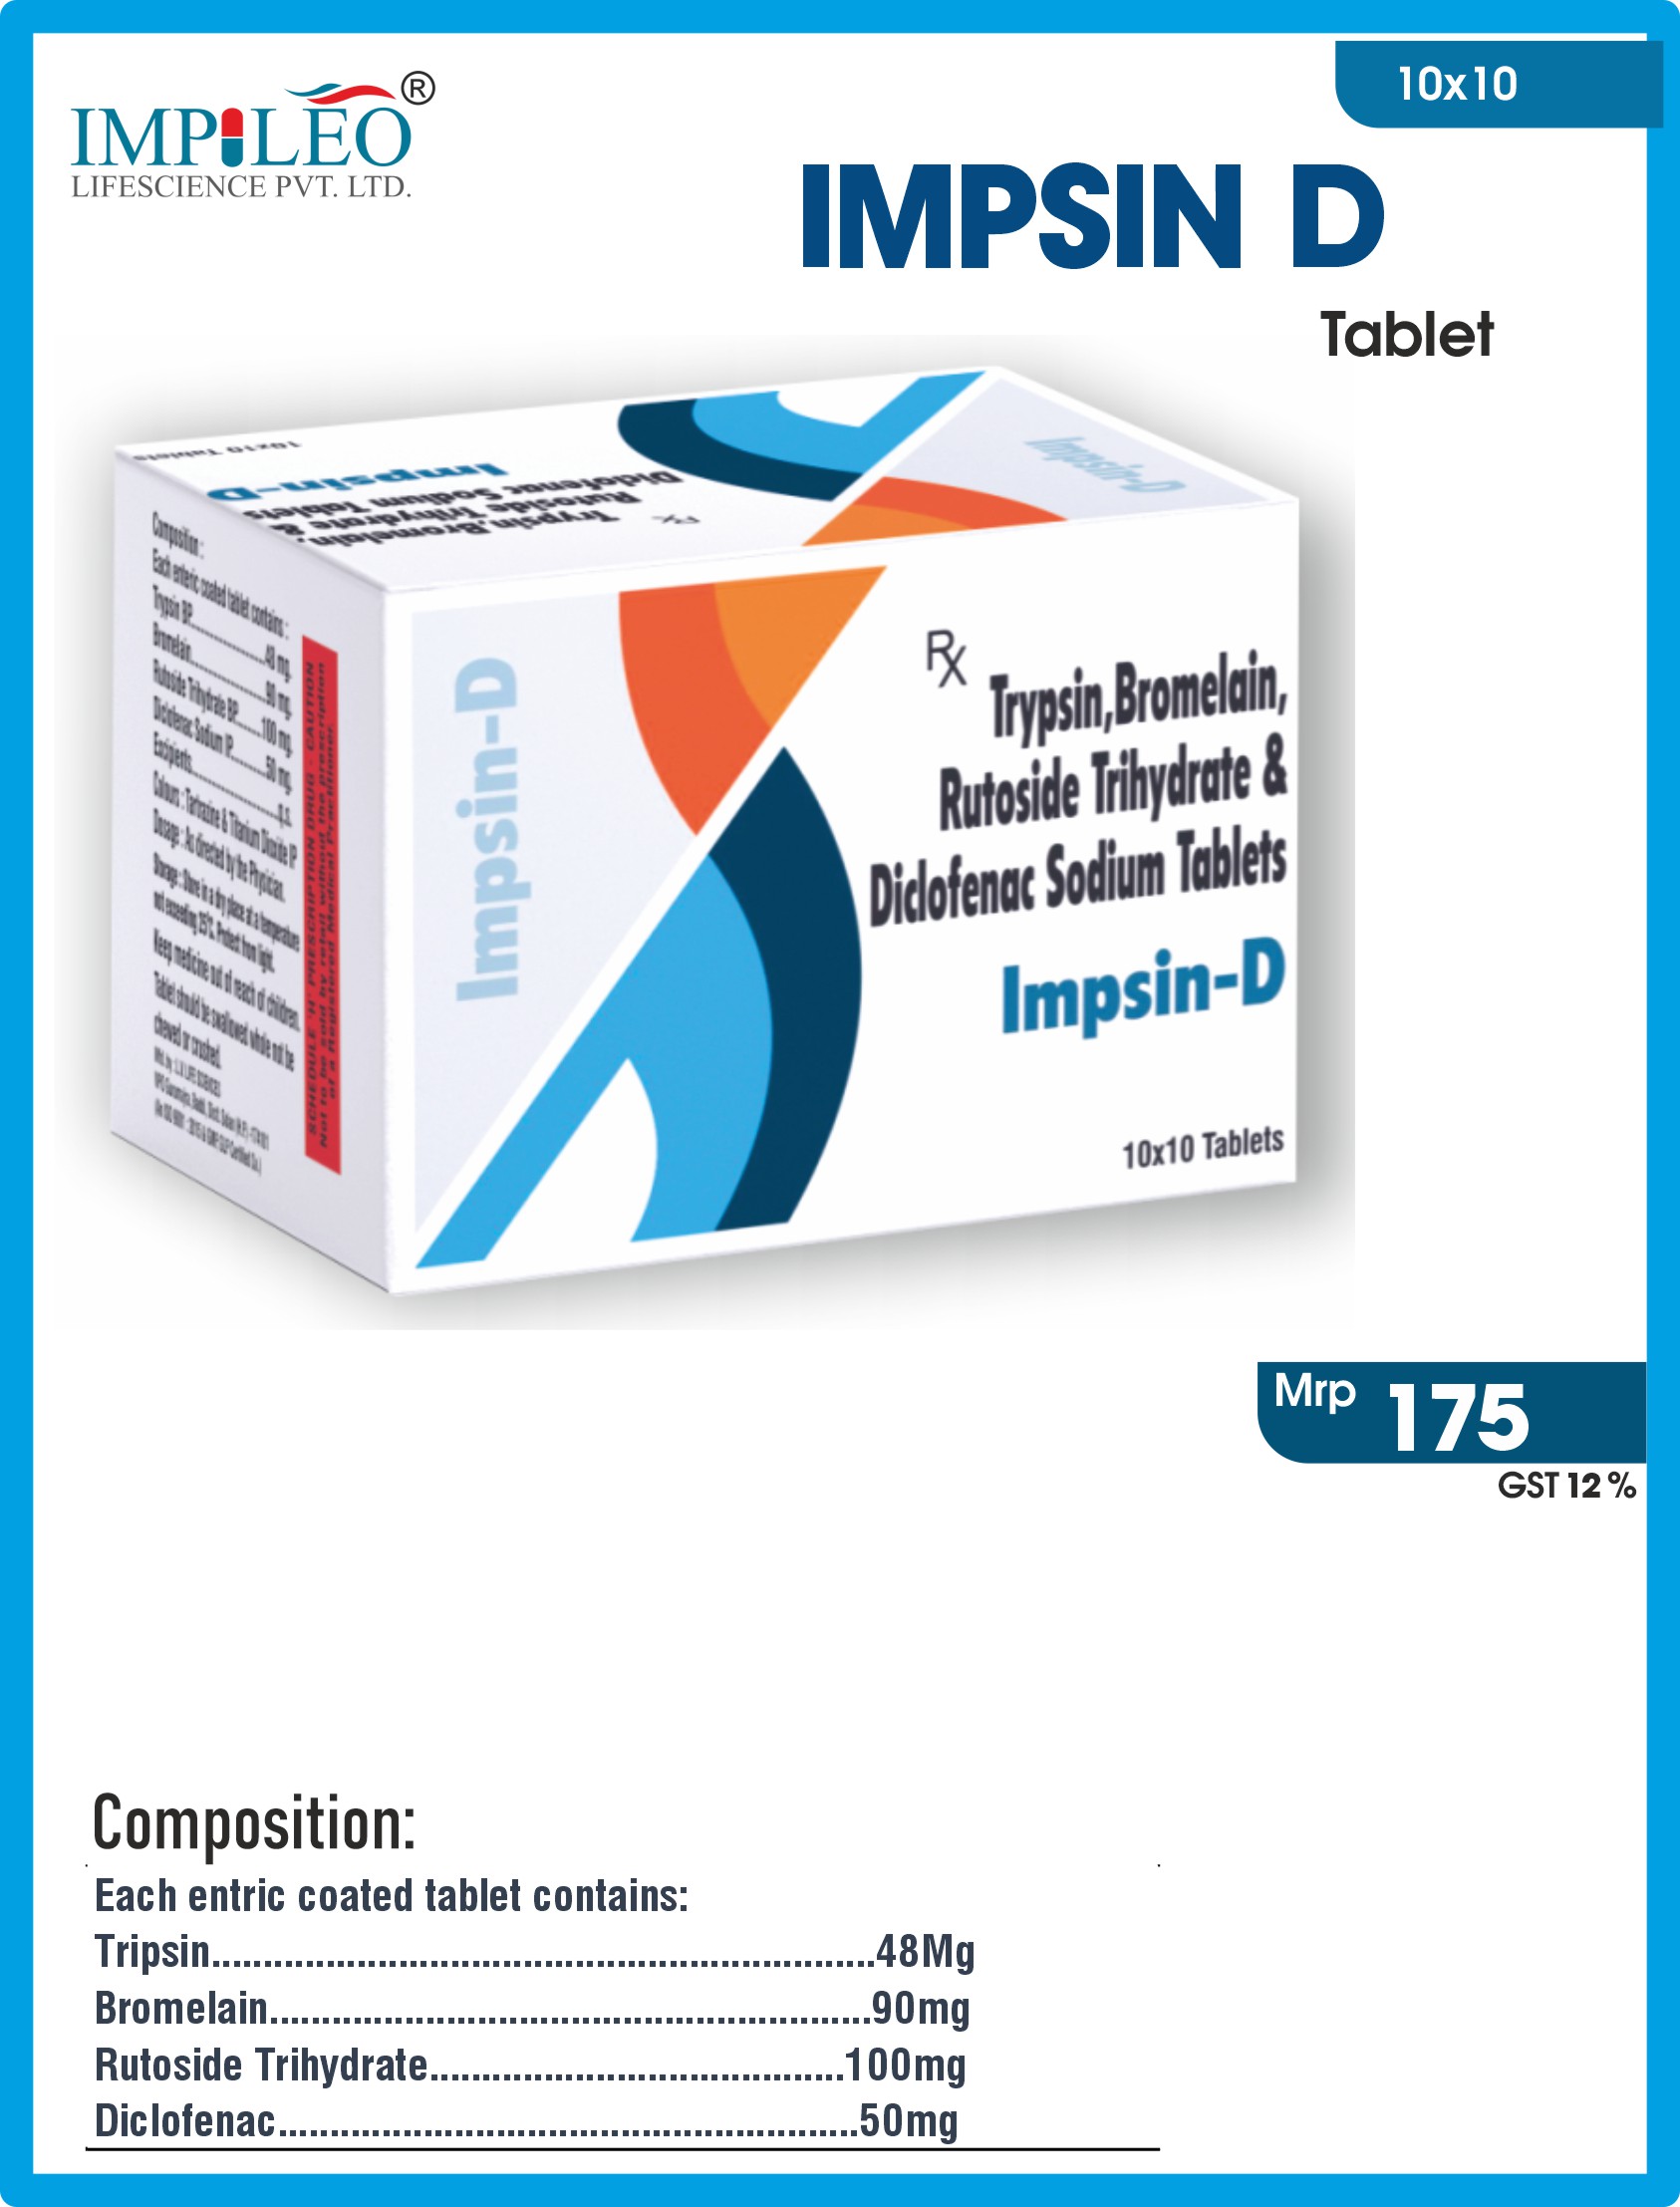 Experience Expansion: PCD Pharma Franchise in Chandigarh with IMPSIN-D Tablet